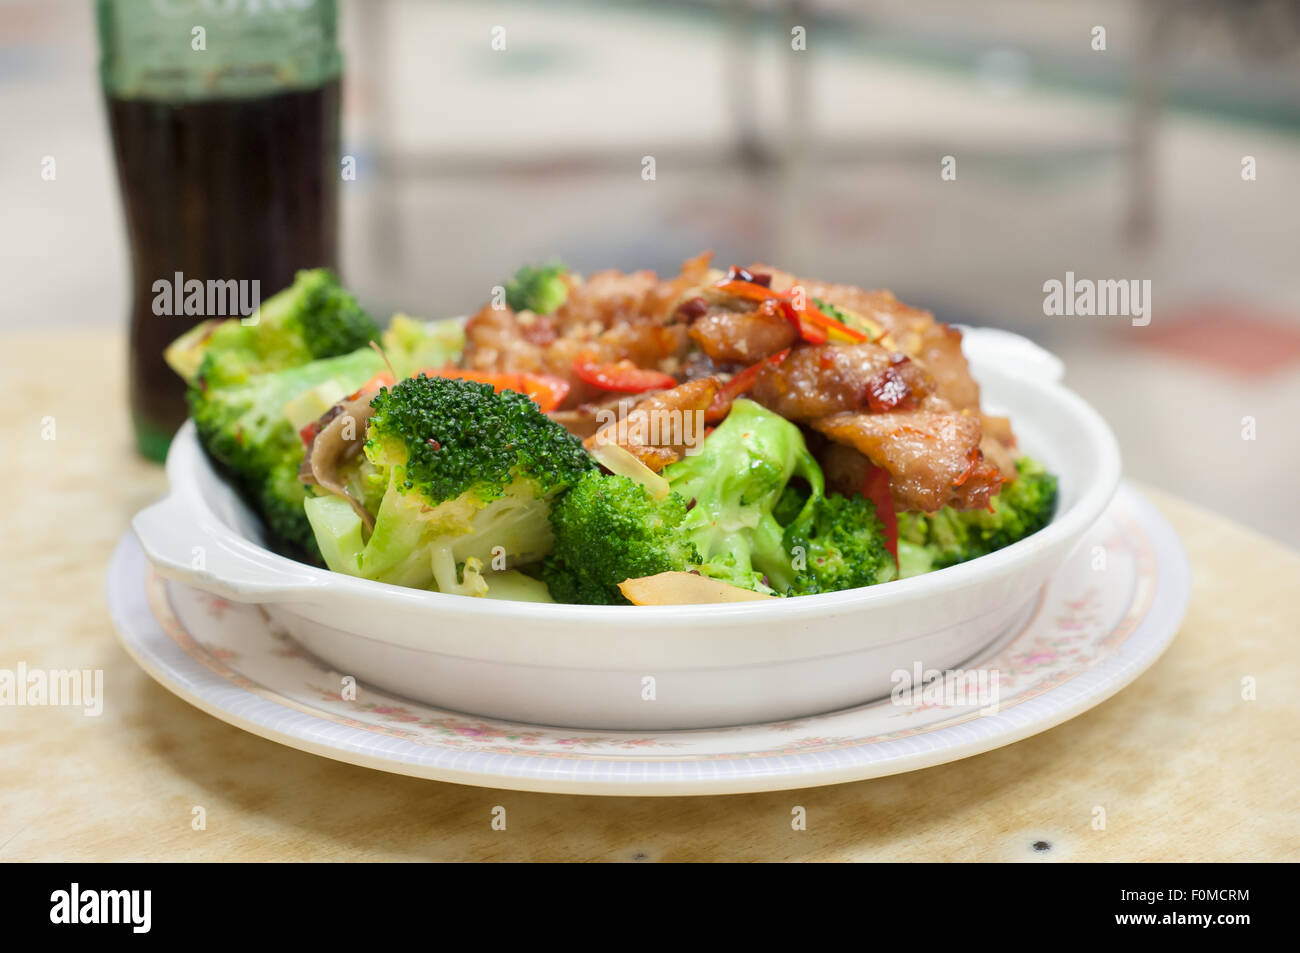 Stir-fried pork and broccoli dish served at a Hong Kong Cooked Food Centre Stock Photo